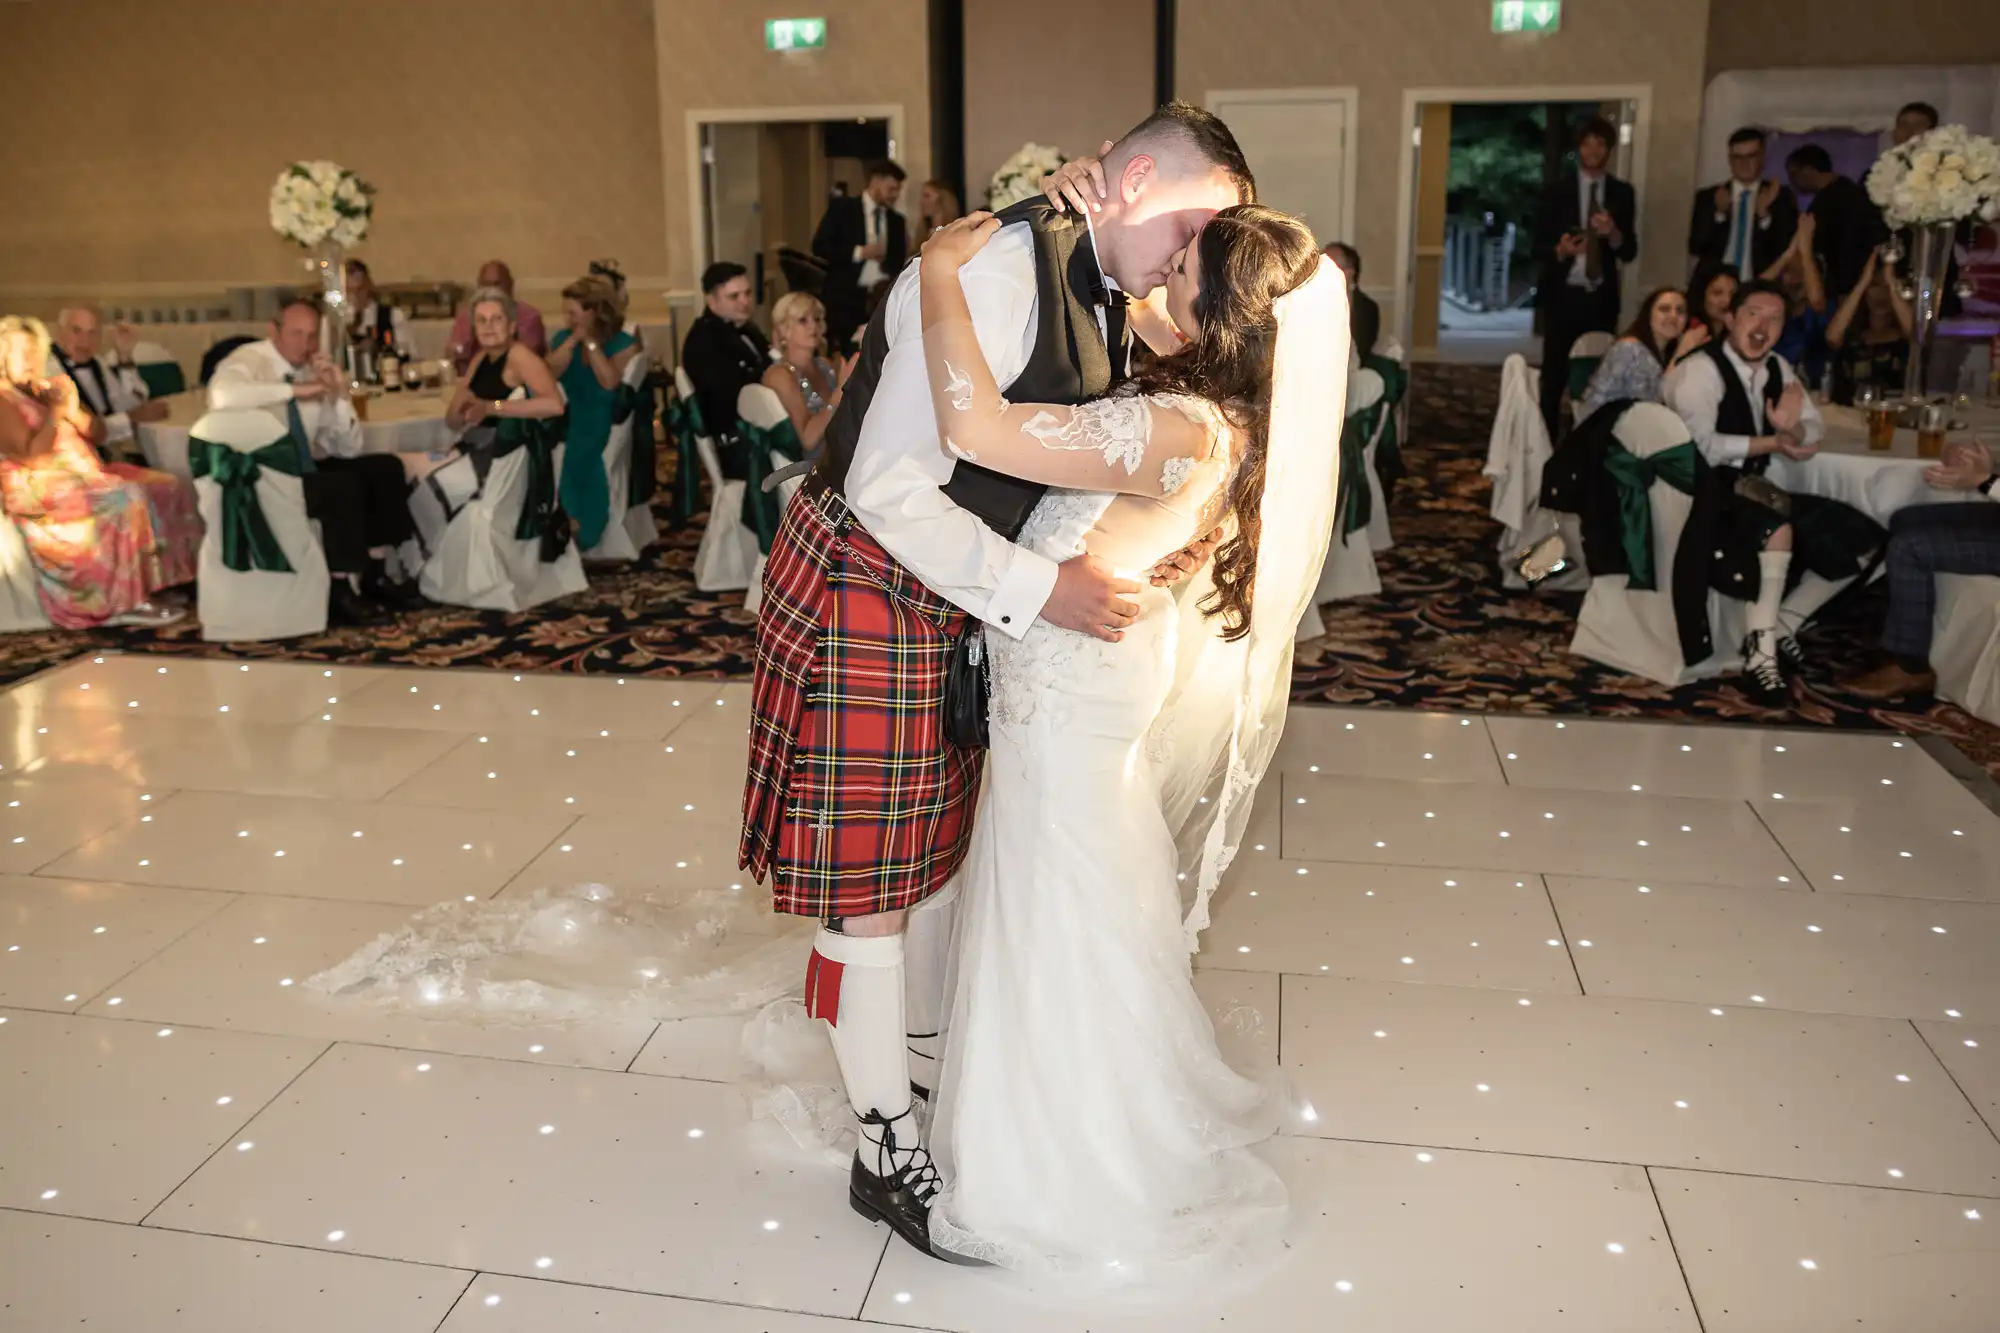 A bride and groom embracing and kissing on a dance floor, the groom wearing a kilt, with wedding guests watching in the background.